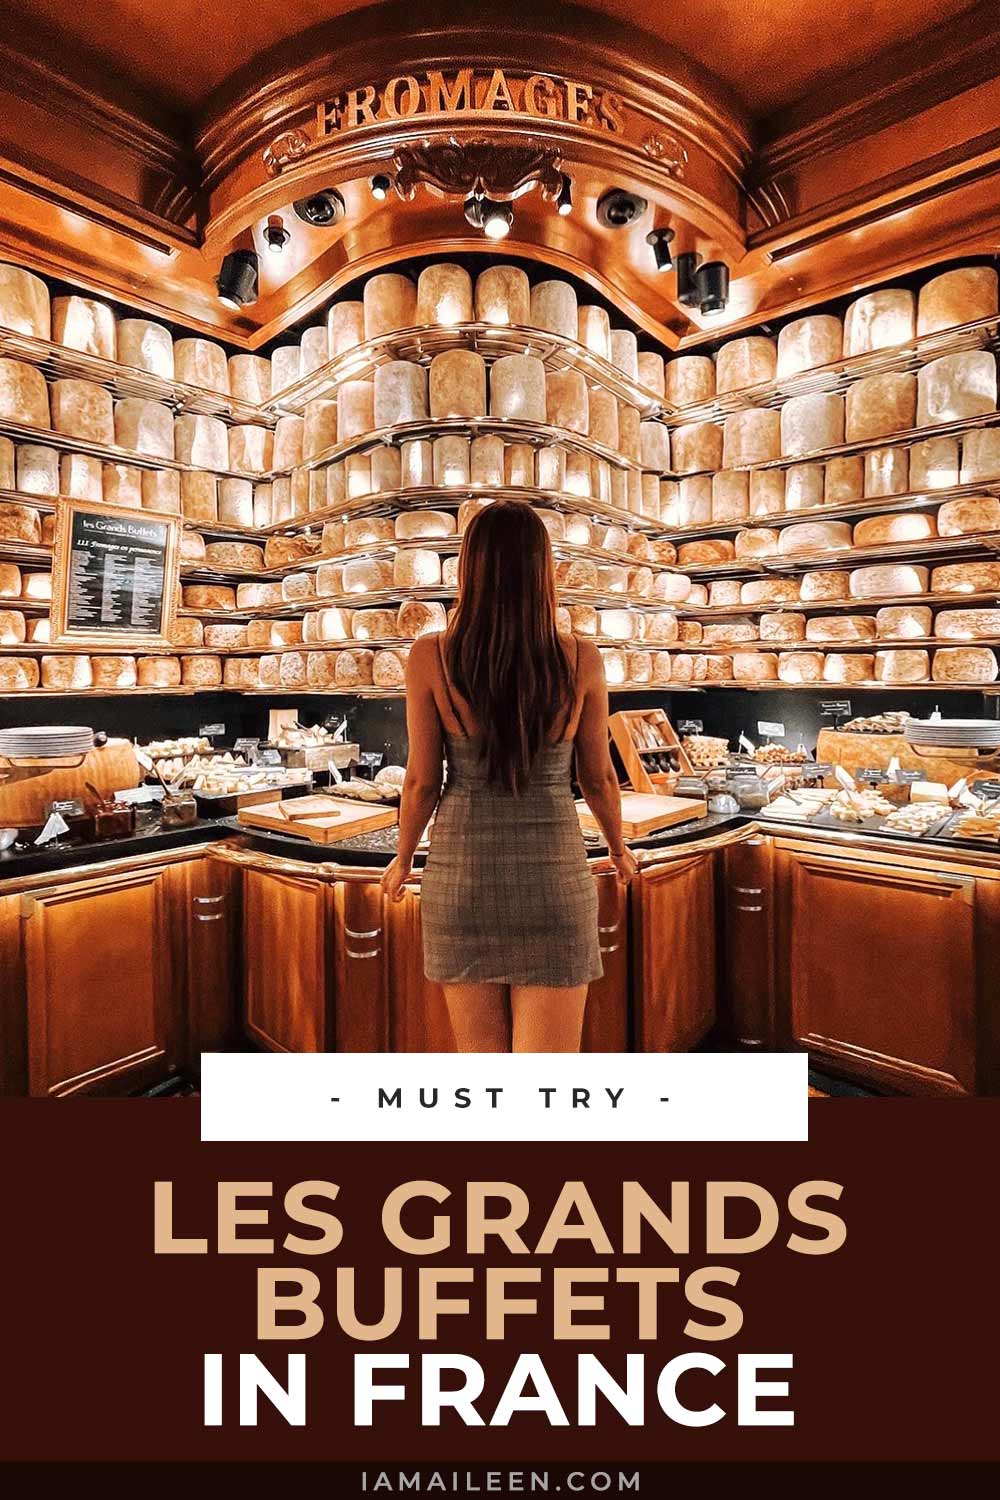 Les Grands Buffets: Guinness World Record Largest Cheese Selection